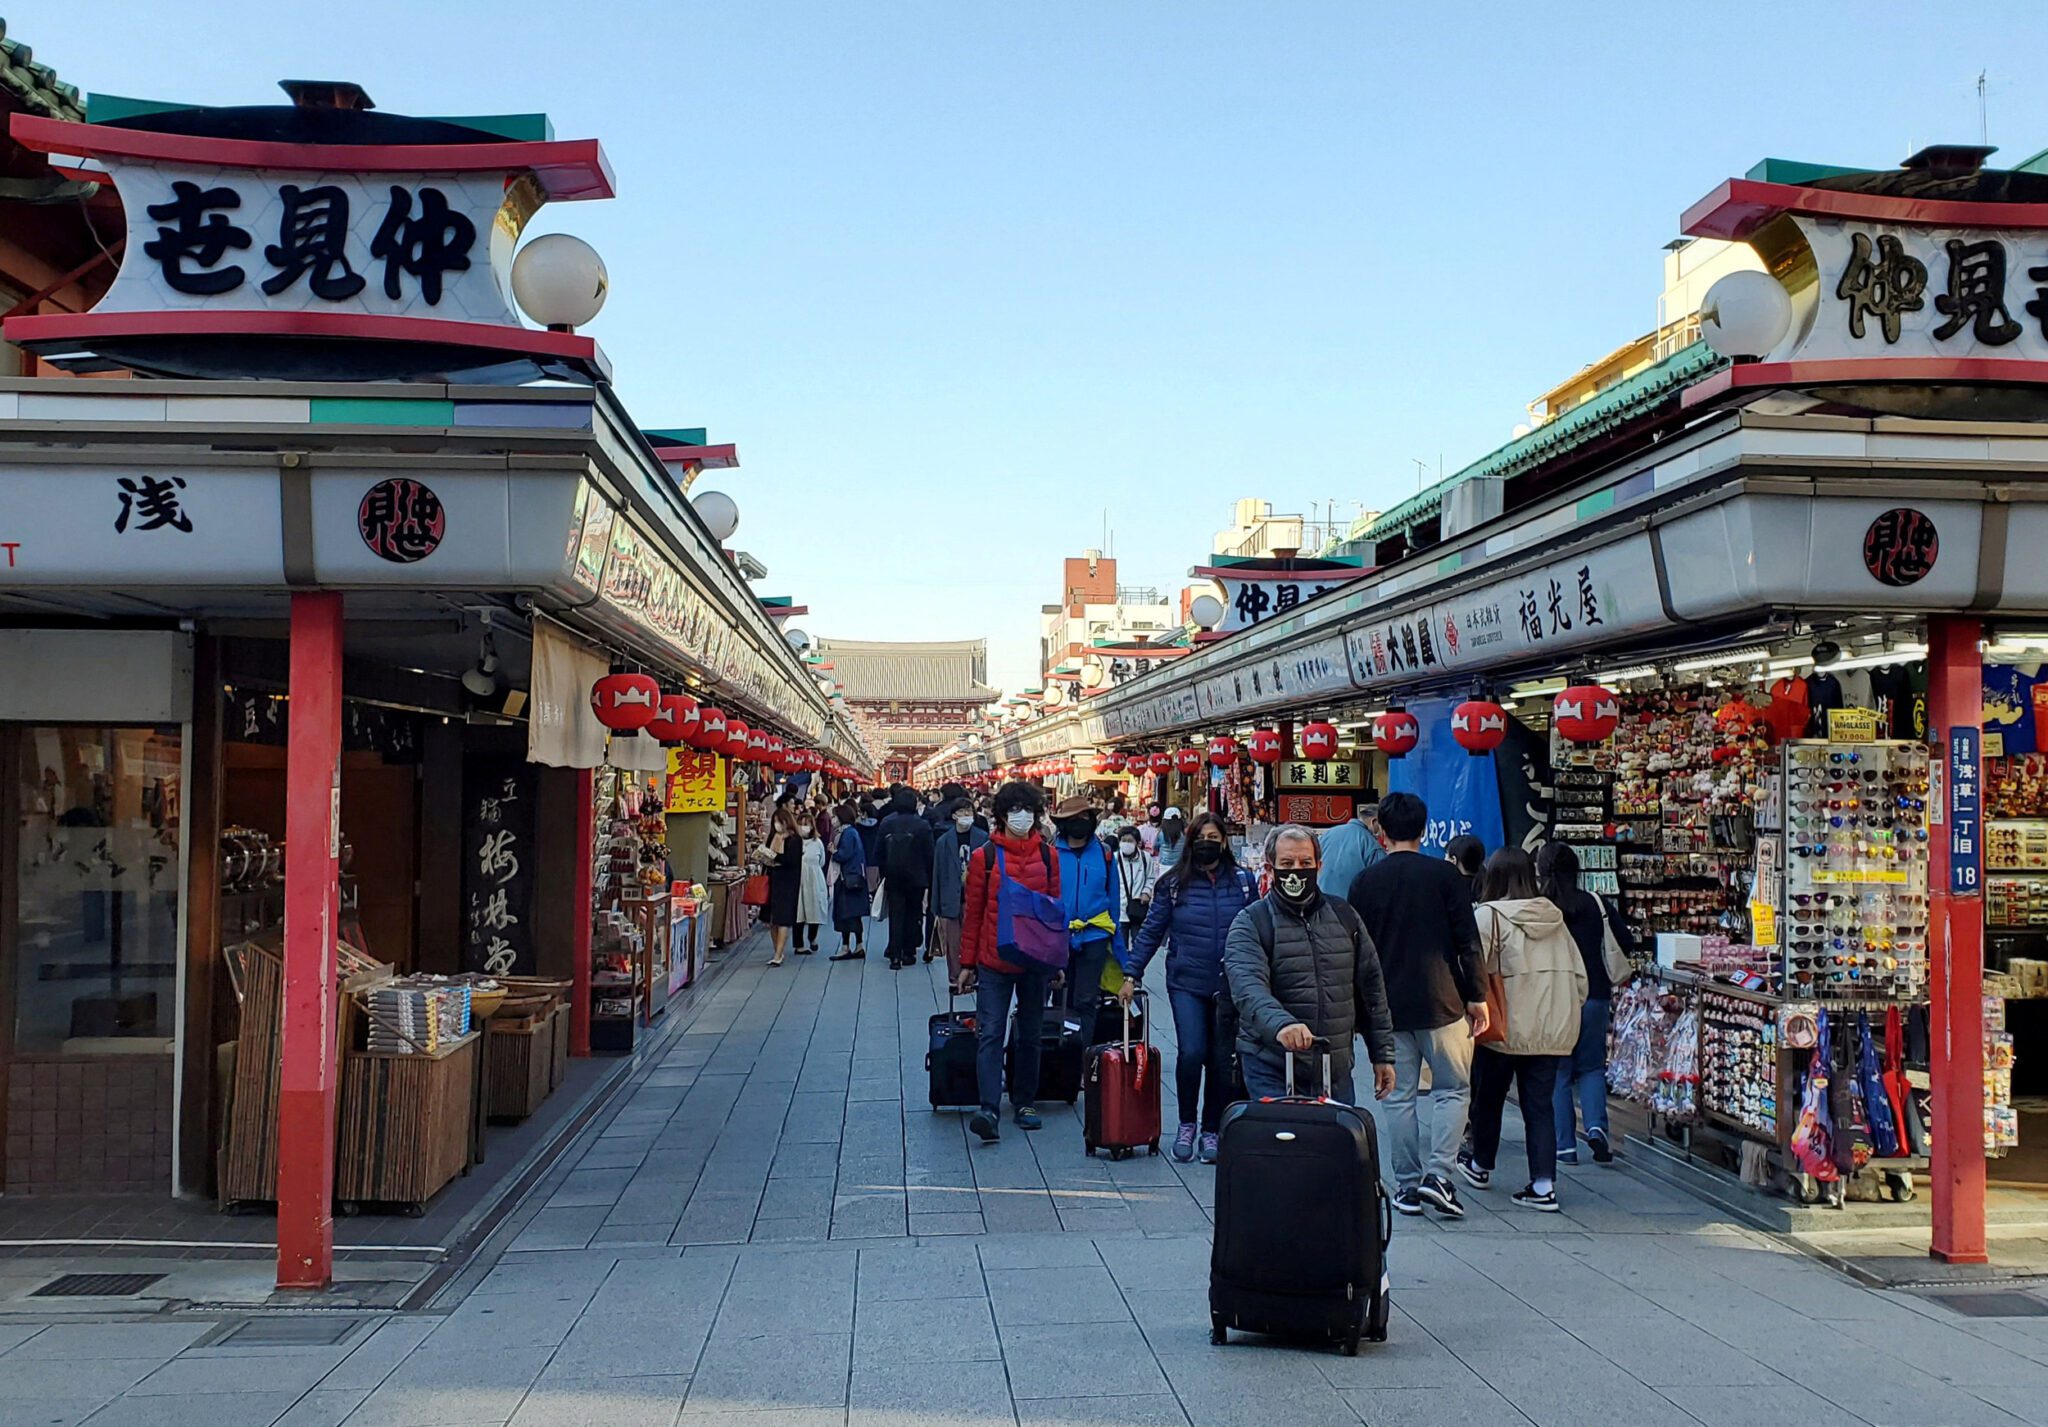 Nearly 11 million tourists visited Japan in the first half of the year.